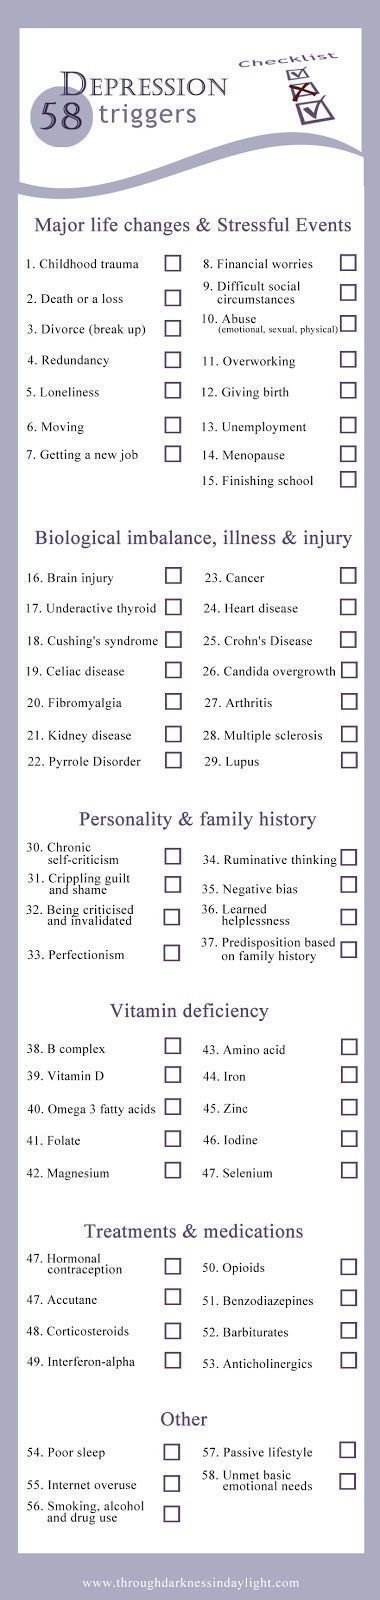 Download your checklist and eliminate or discover potential causes of depression or find out whether youre in a risk of